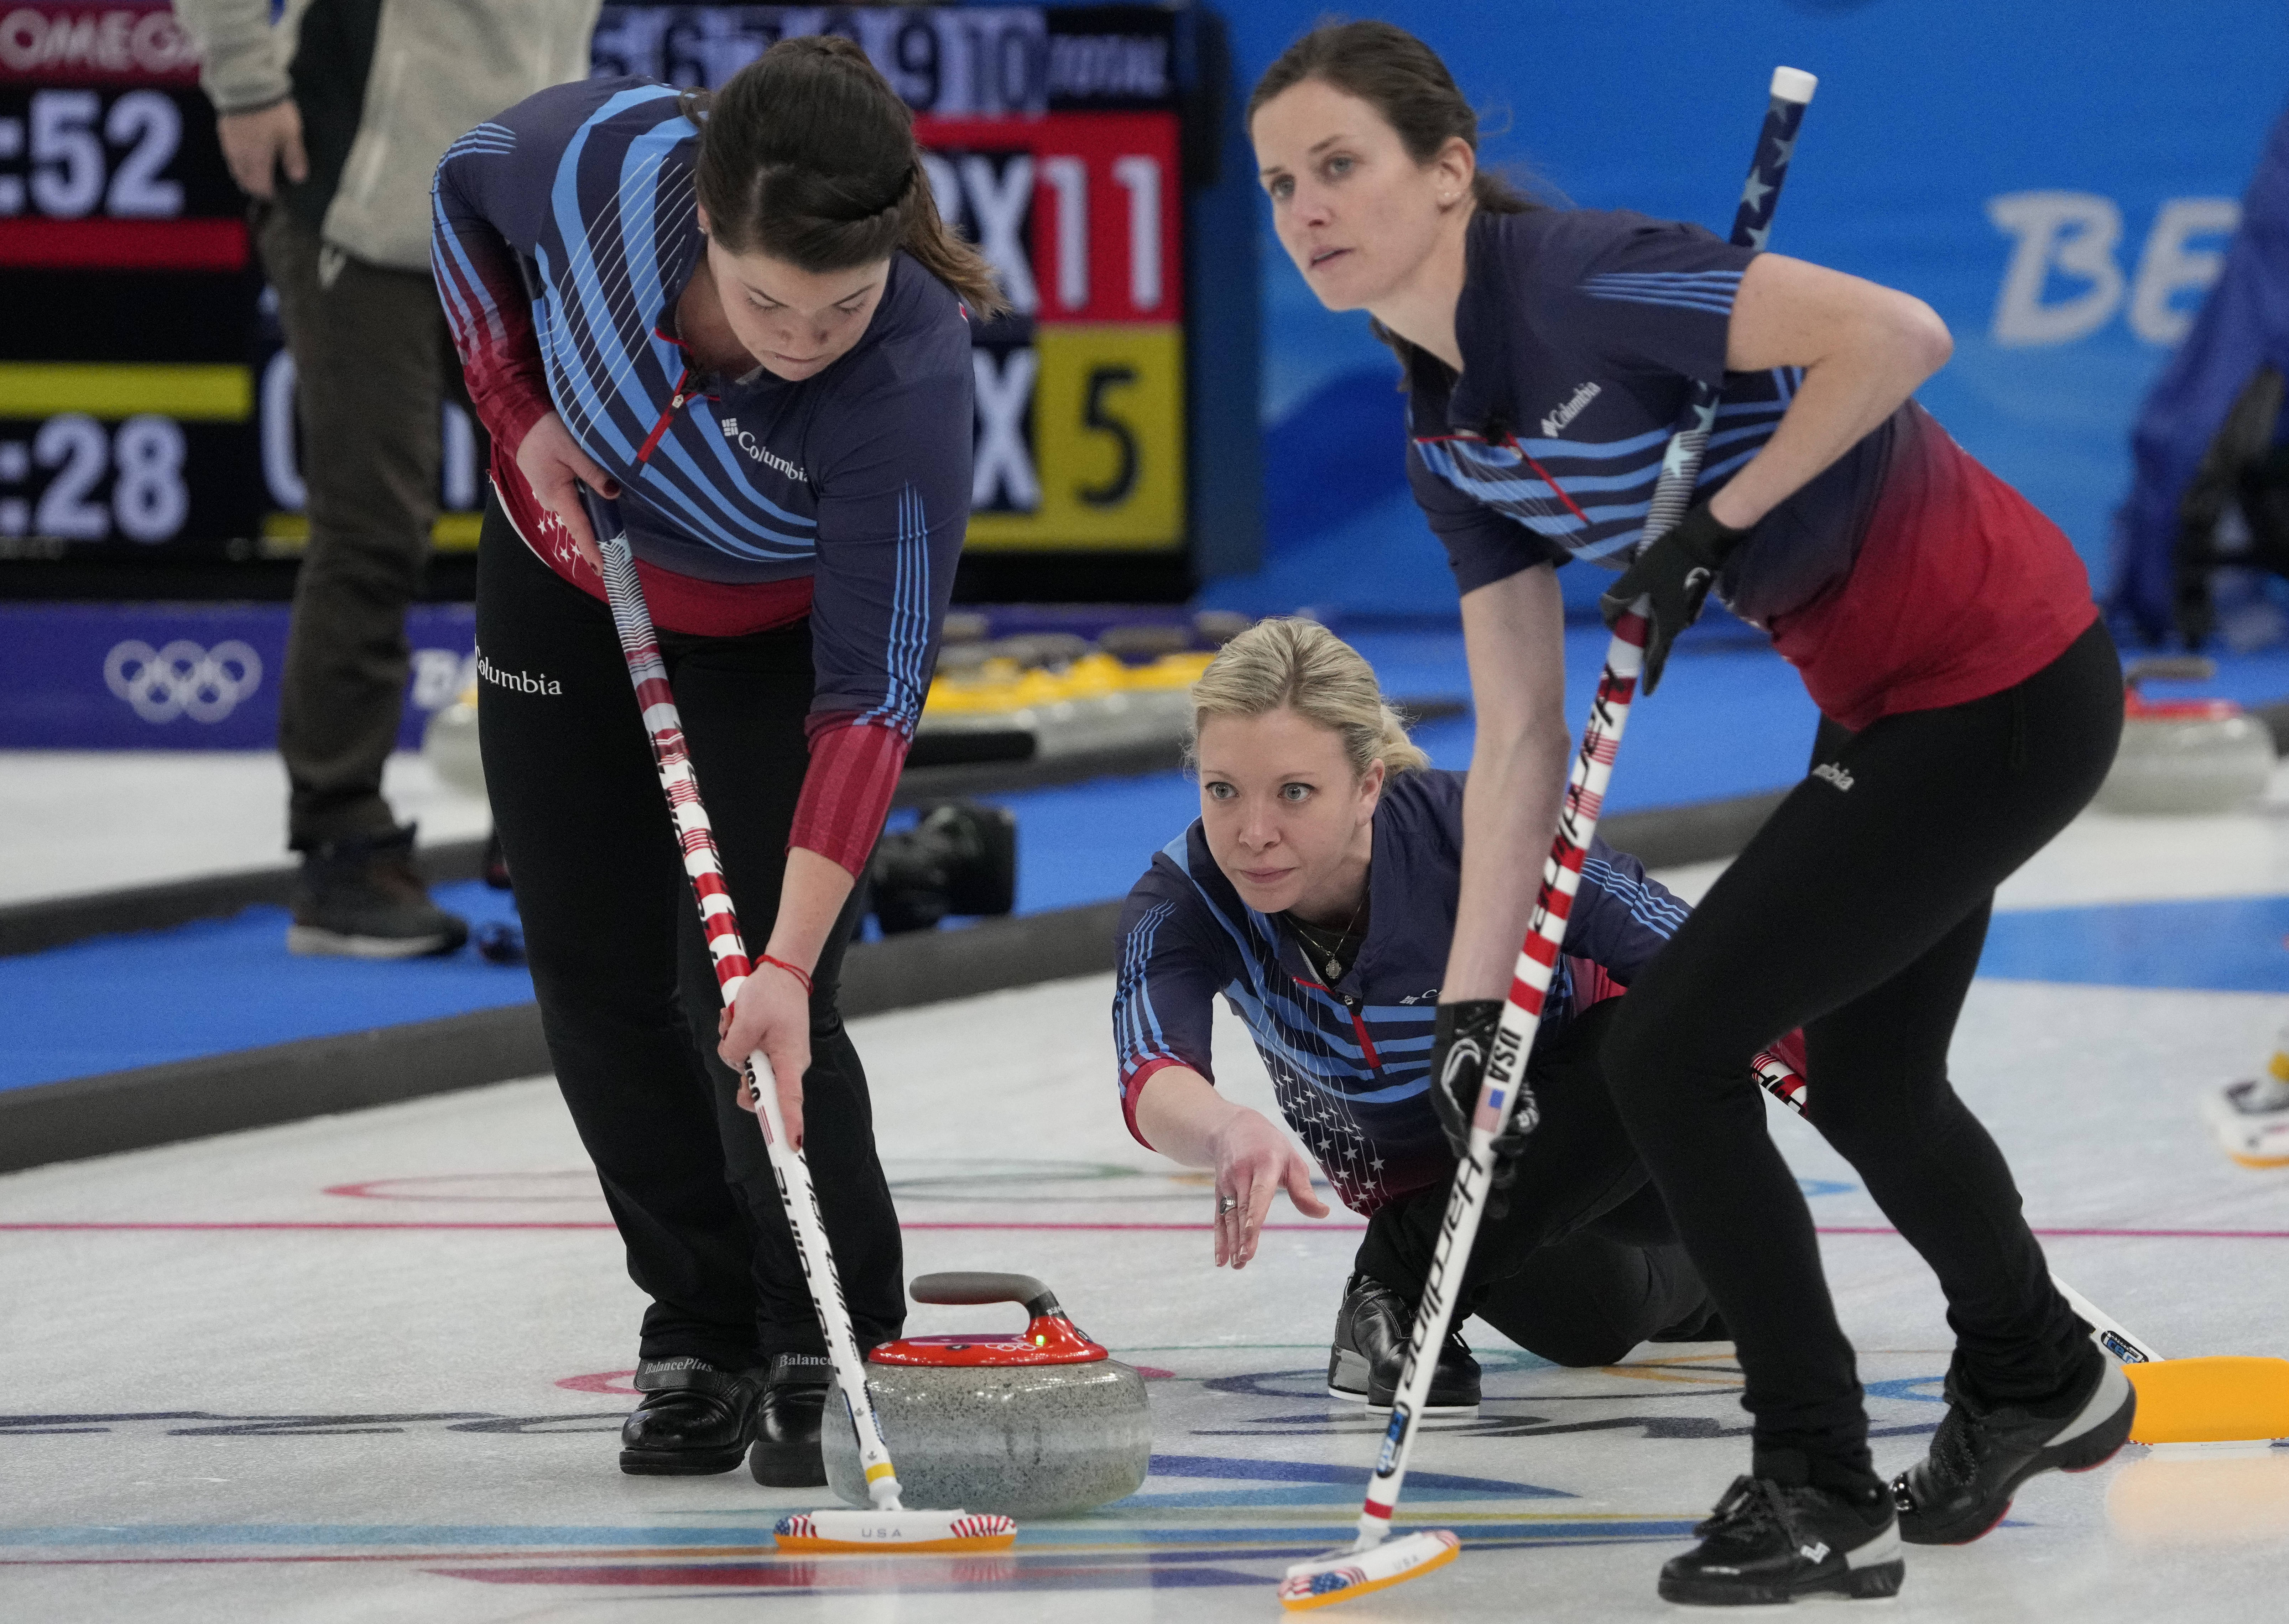 Team Usa Dominates In Women S Curling Match At Winter Olympics Nbc Los Angeles